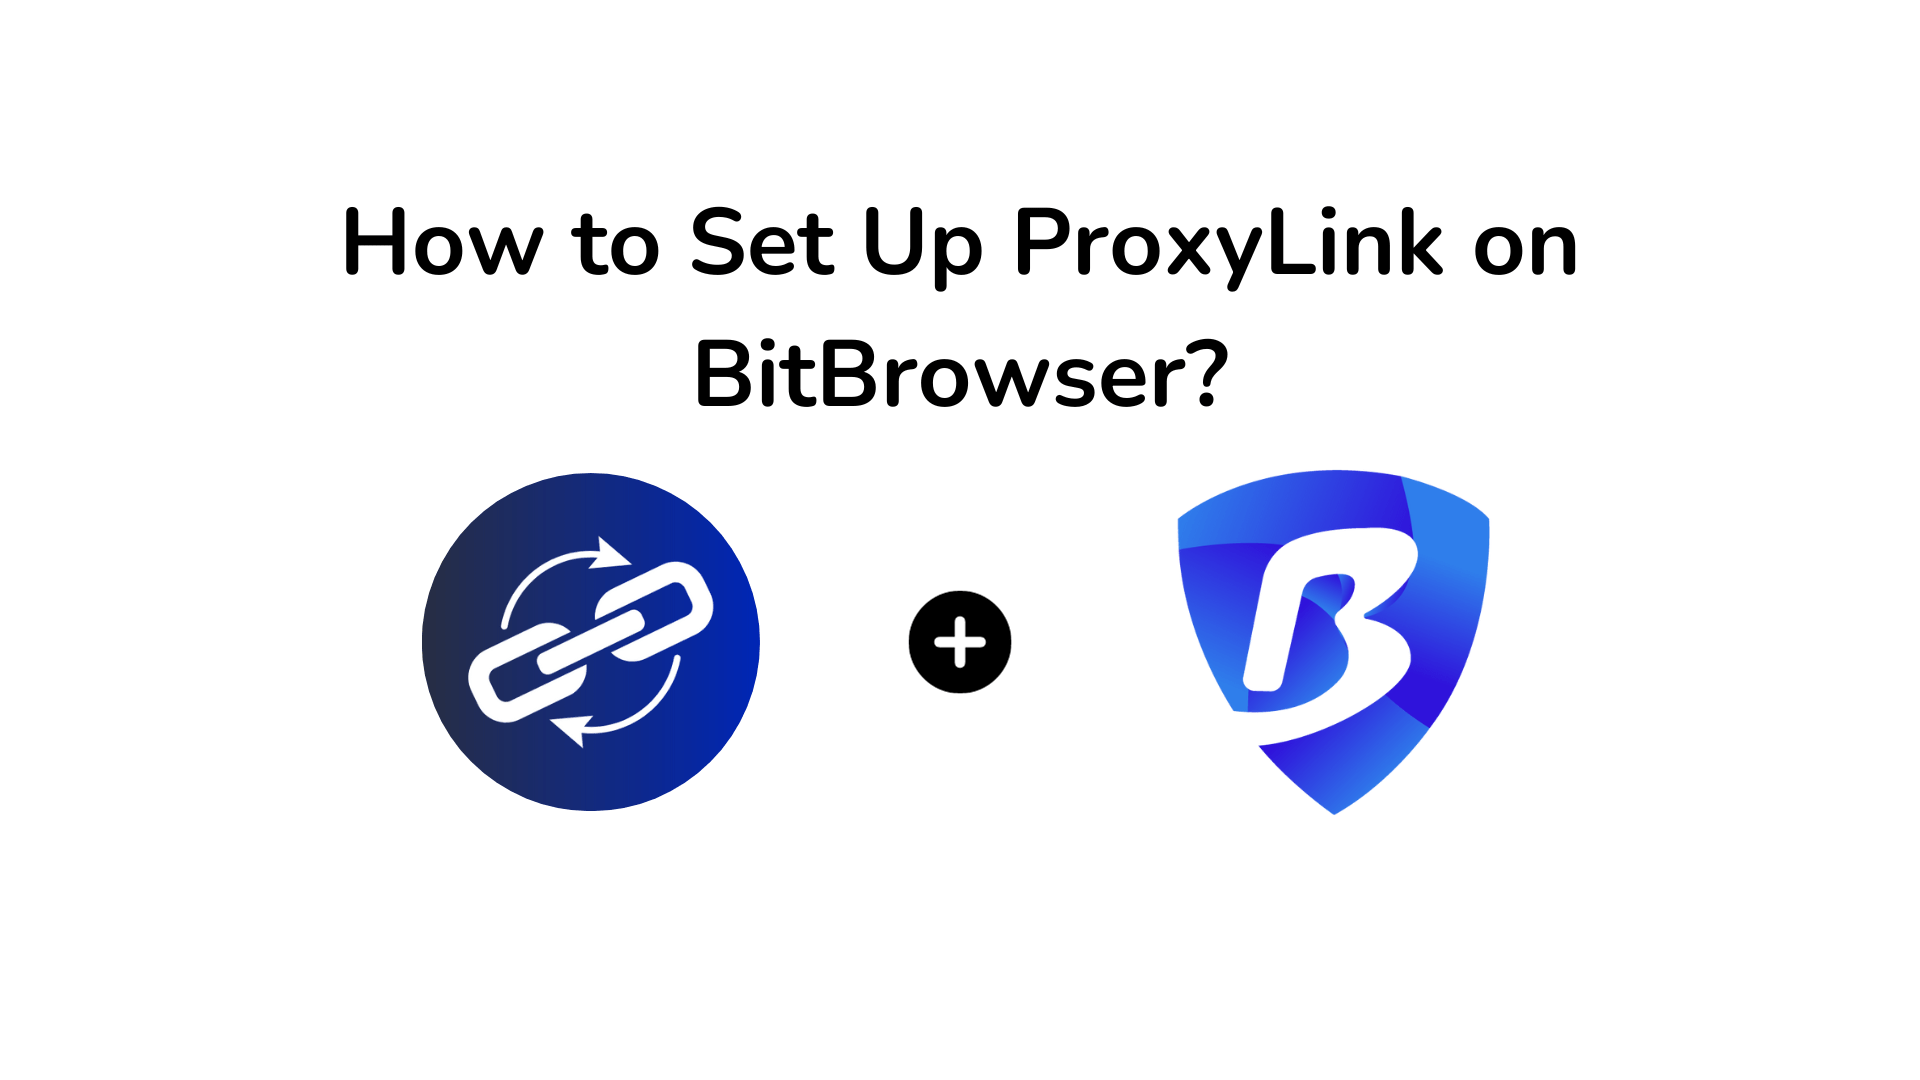 How to Set Up ProxyLink on BitBrowser?